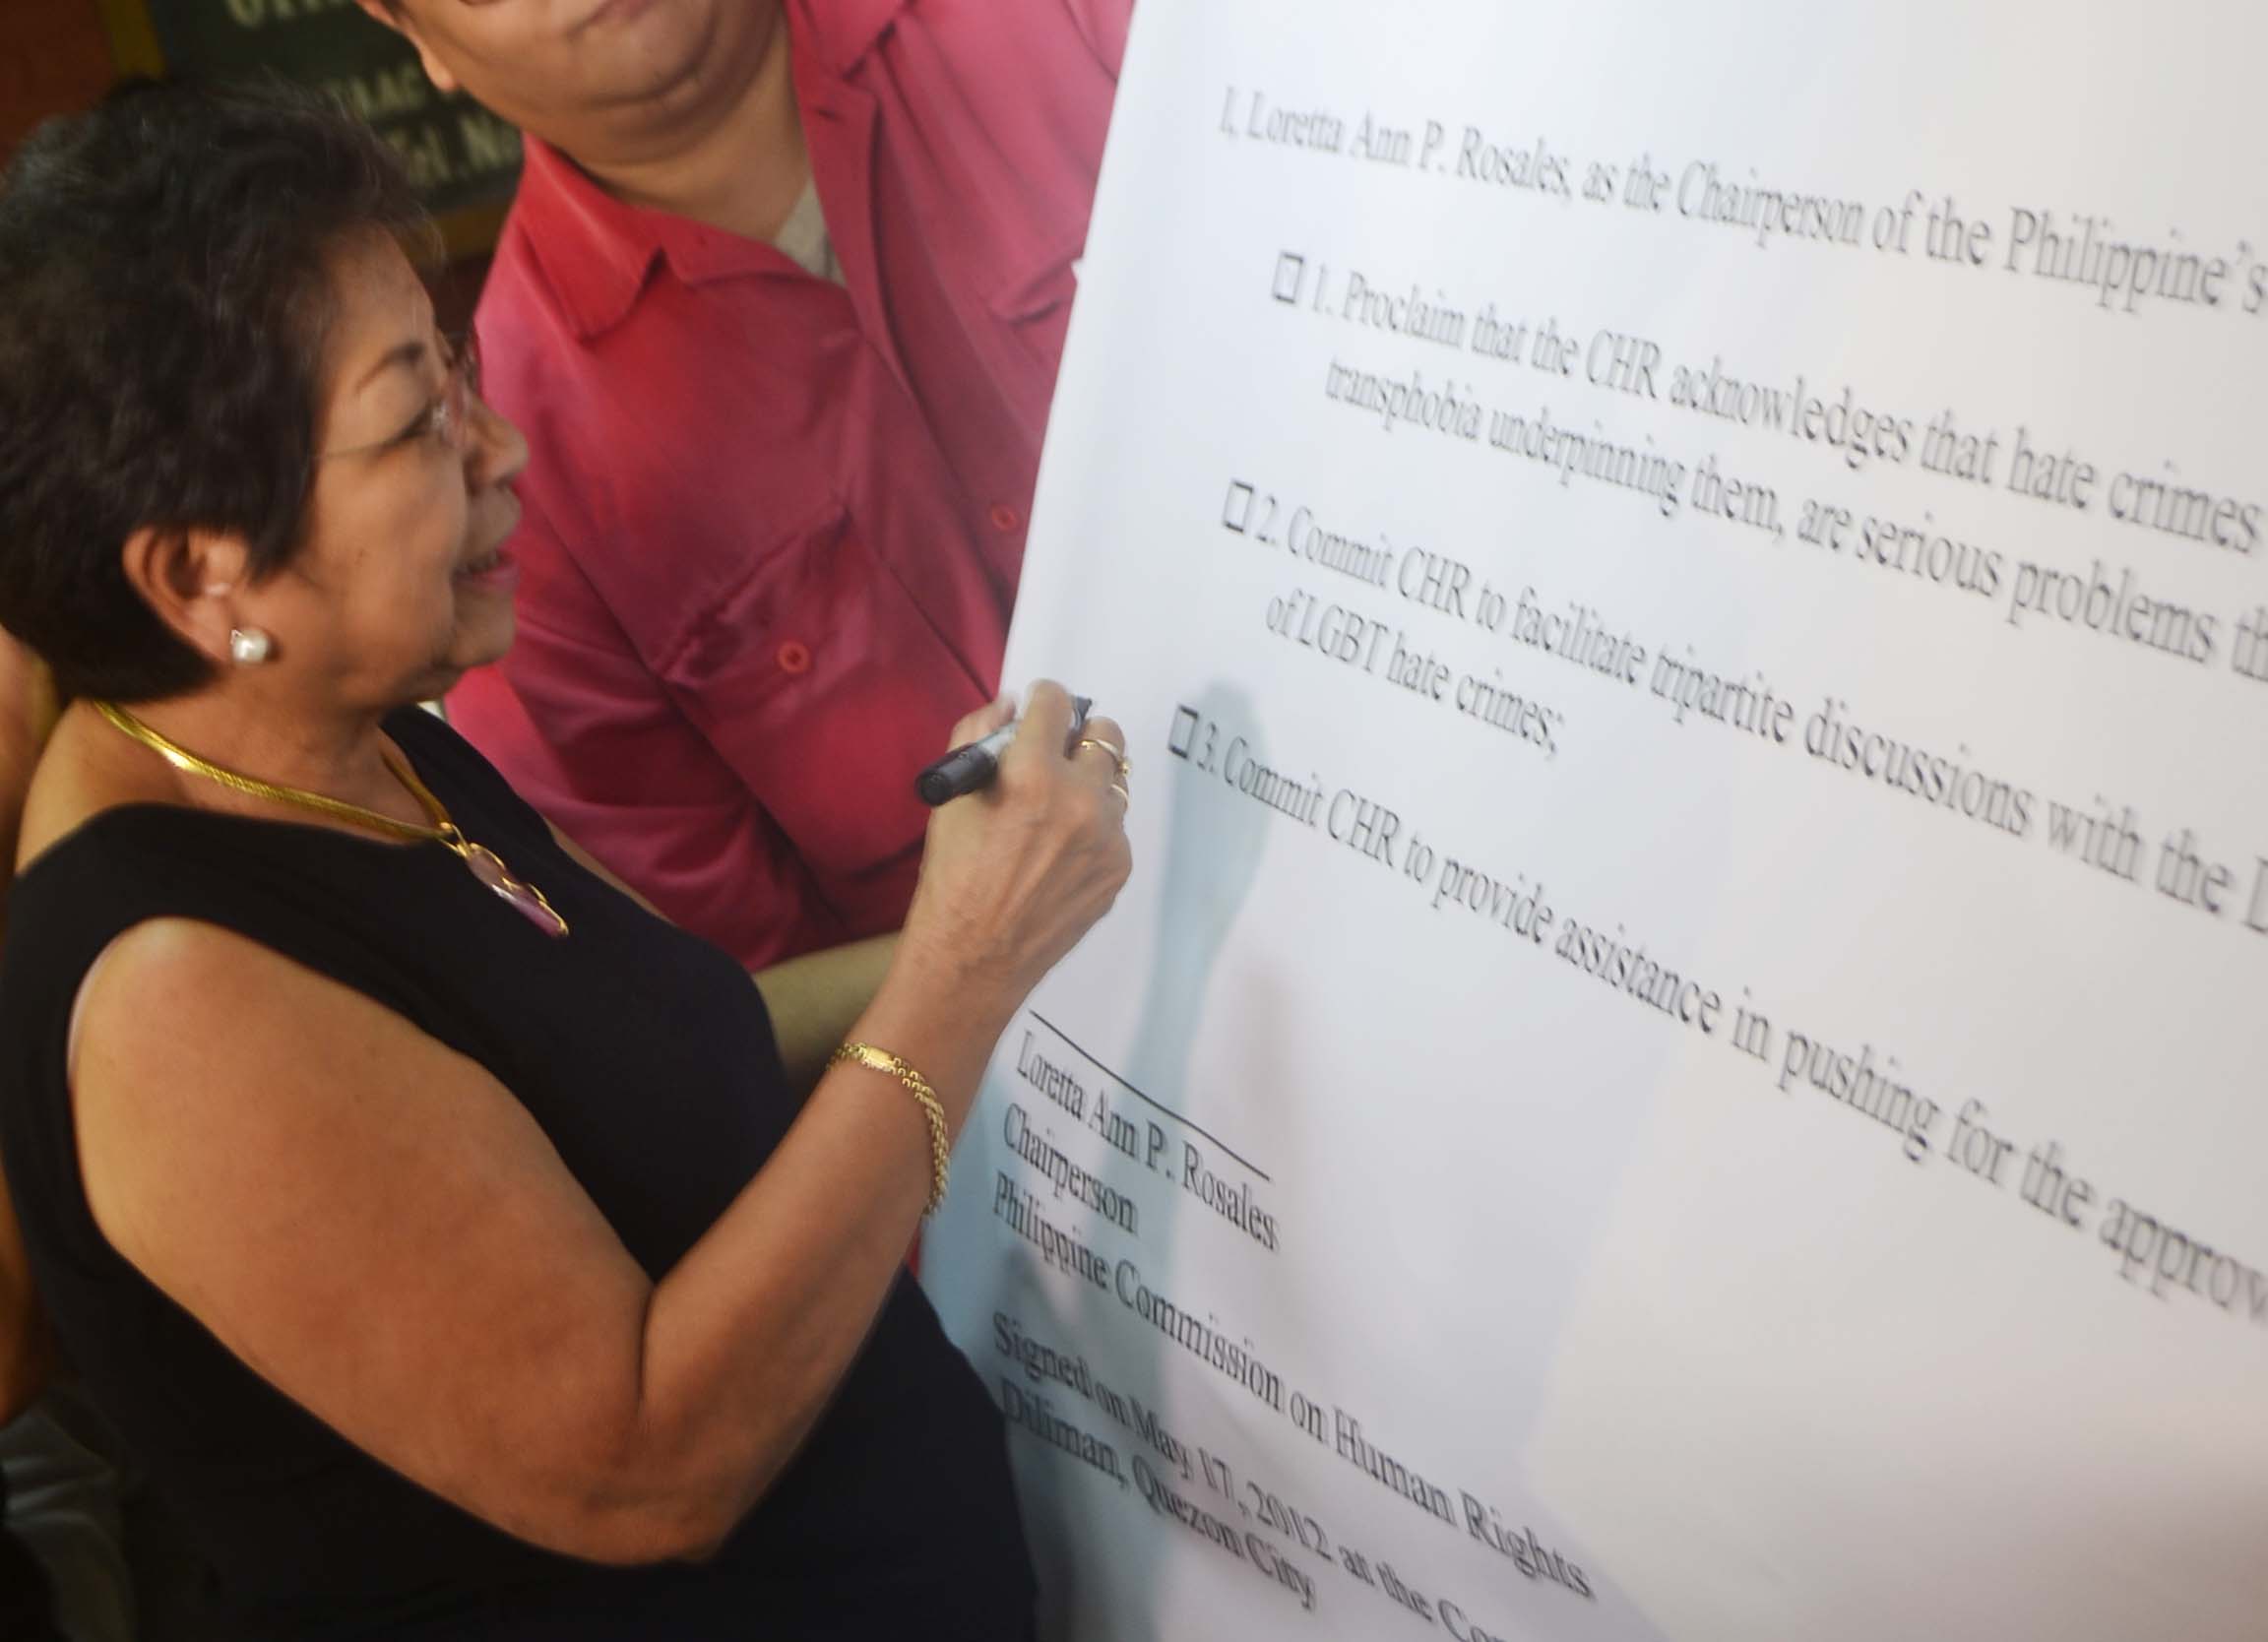 LEADER. Loretta Ann P. Rosales signs a "certificate" of appreciation for all her contributions to the LGBT movement. Photo by Dawn Fabrero